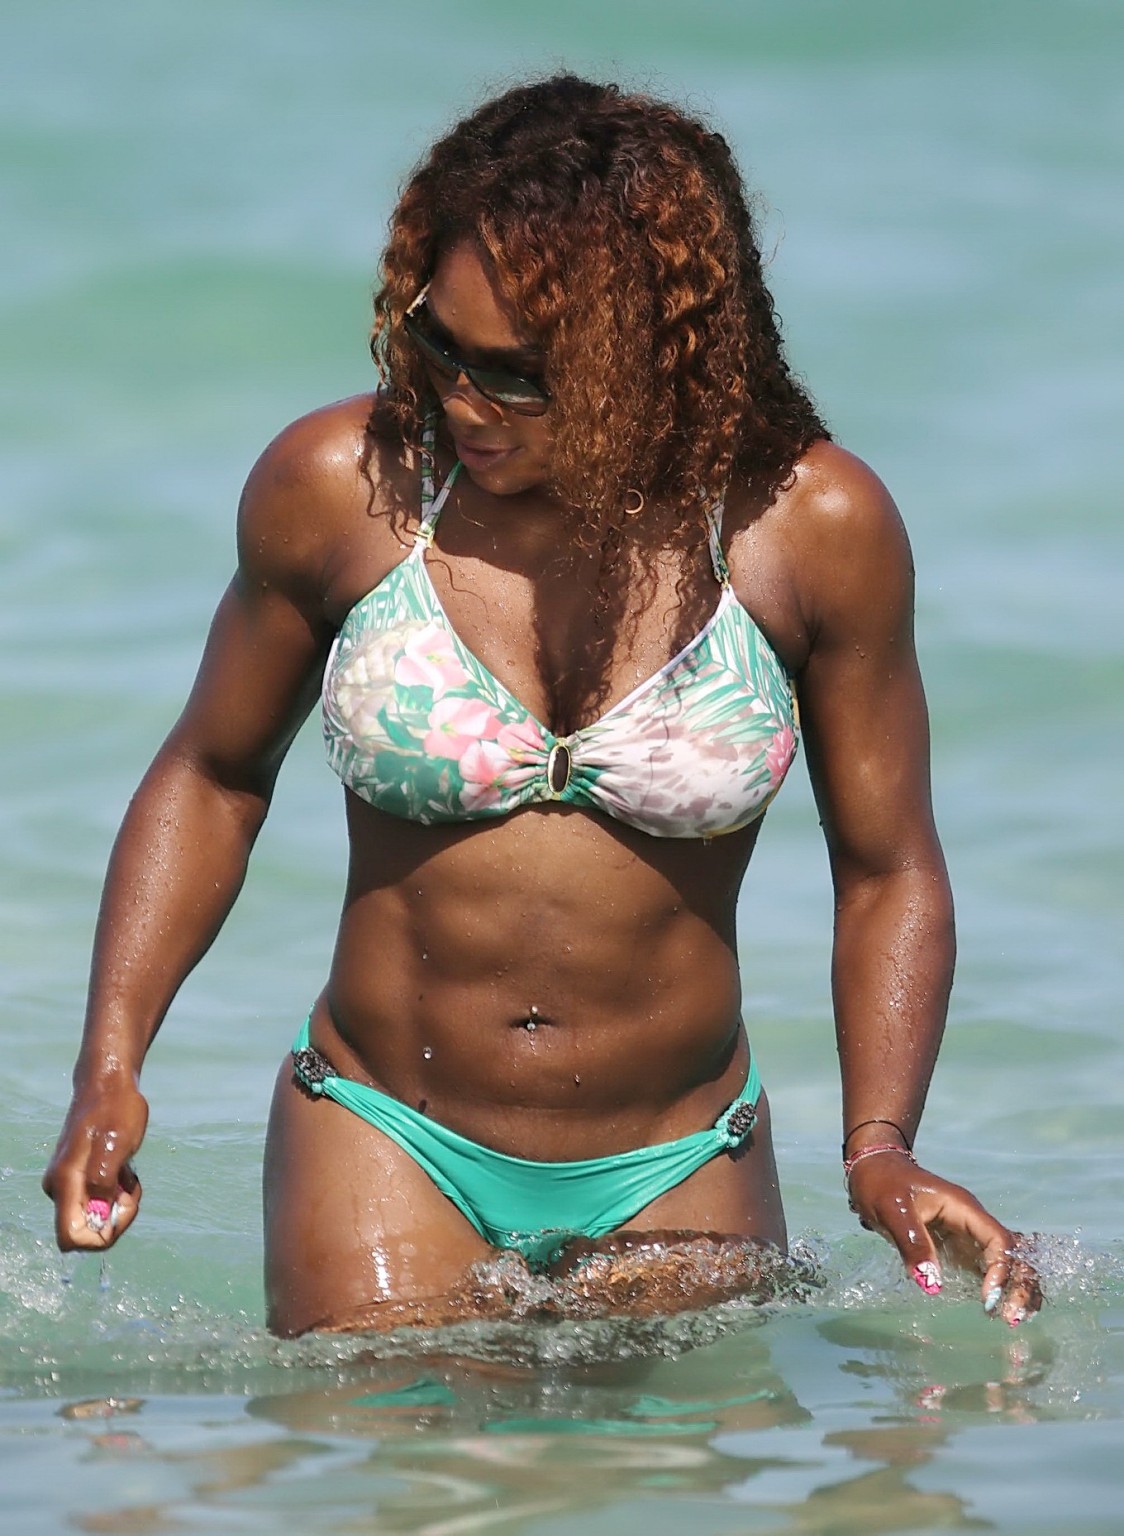 Serena Williams showing off her bikini curves at the beach in Miami #75228658